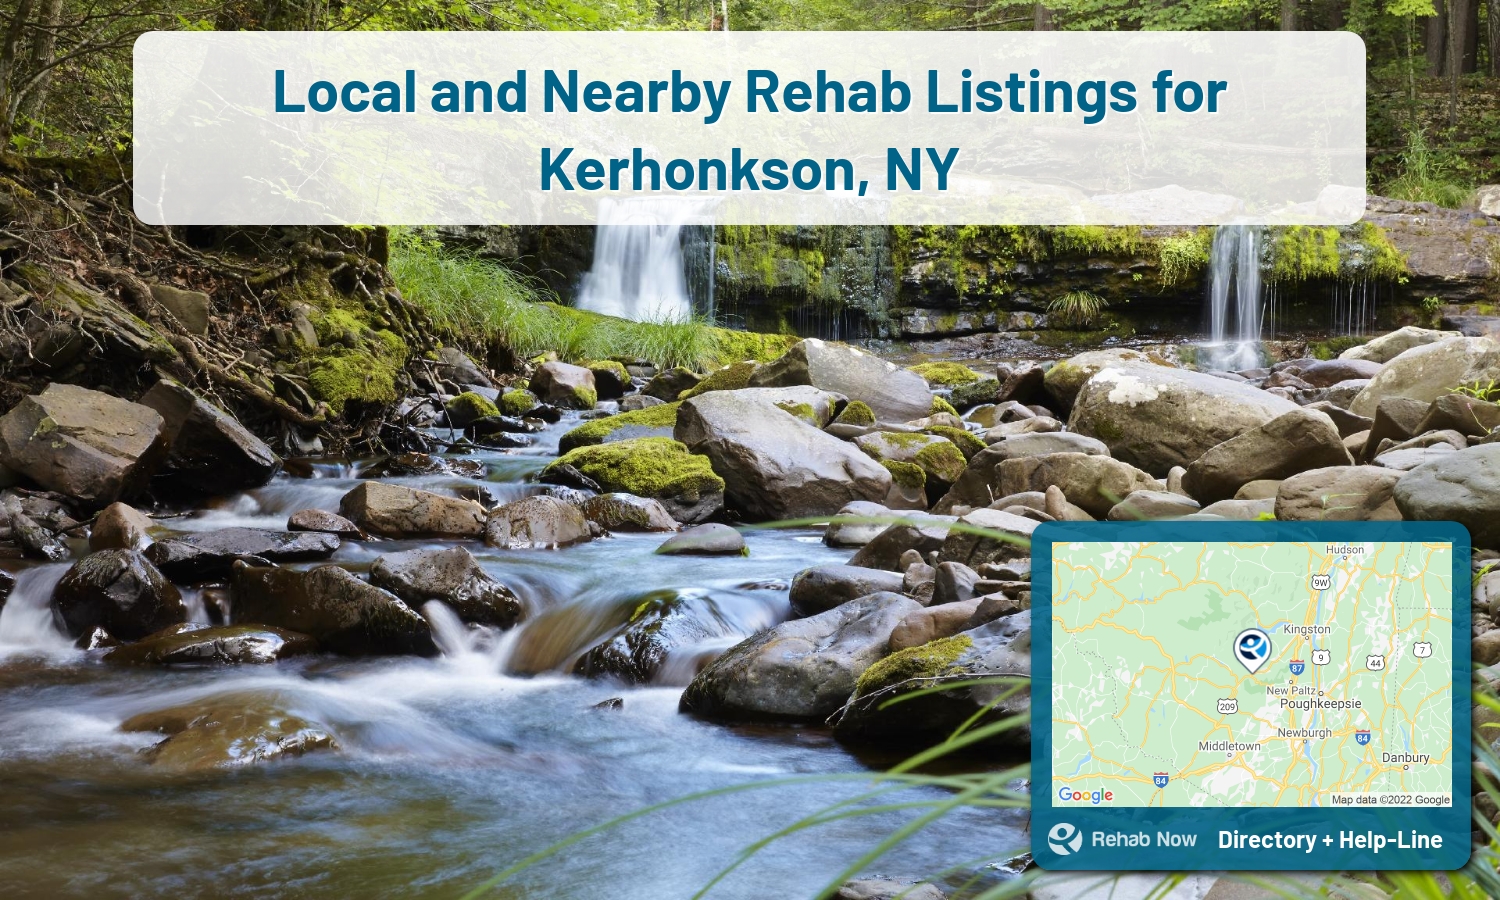 Find drug rehab and alcohol treatment services in Kerhonkson. Our experts help you find a center in Kerhonkson, New York